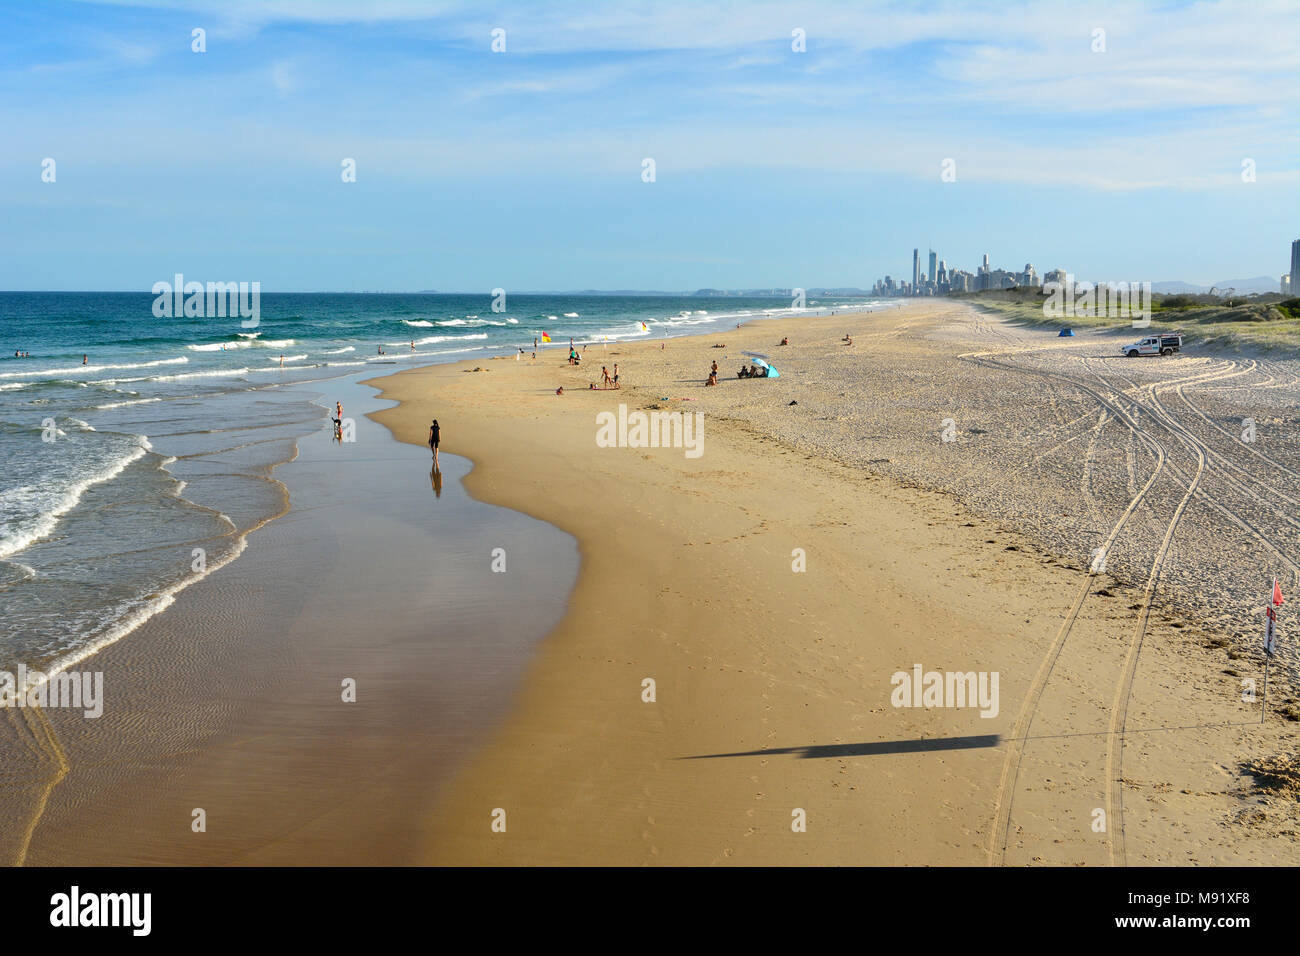 Main Beach, Gold Coast, Queensland, Australia - January 10, 2018. Beach at the Spit, with people and skyscrapers of Surfers Paradise in the distance. Stock Photo